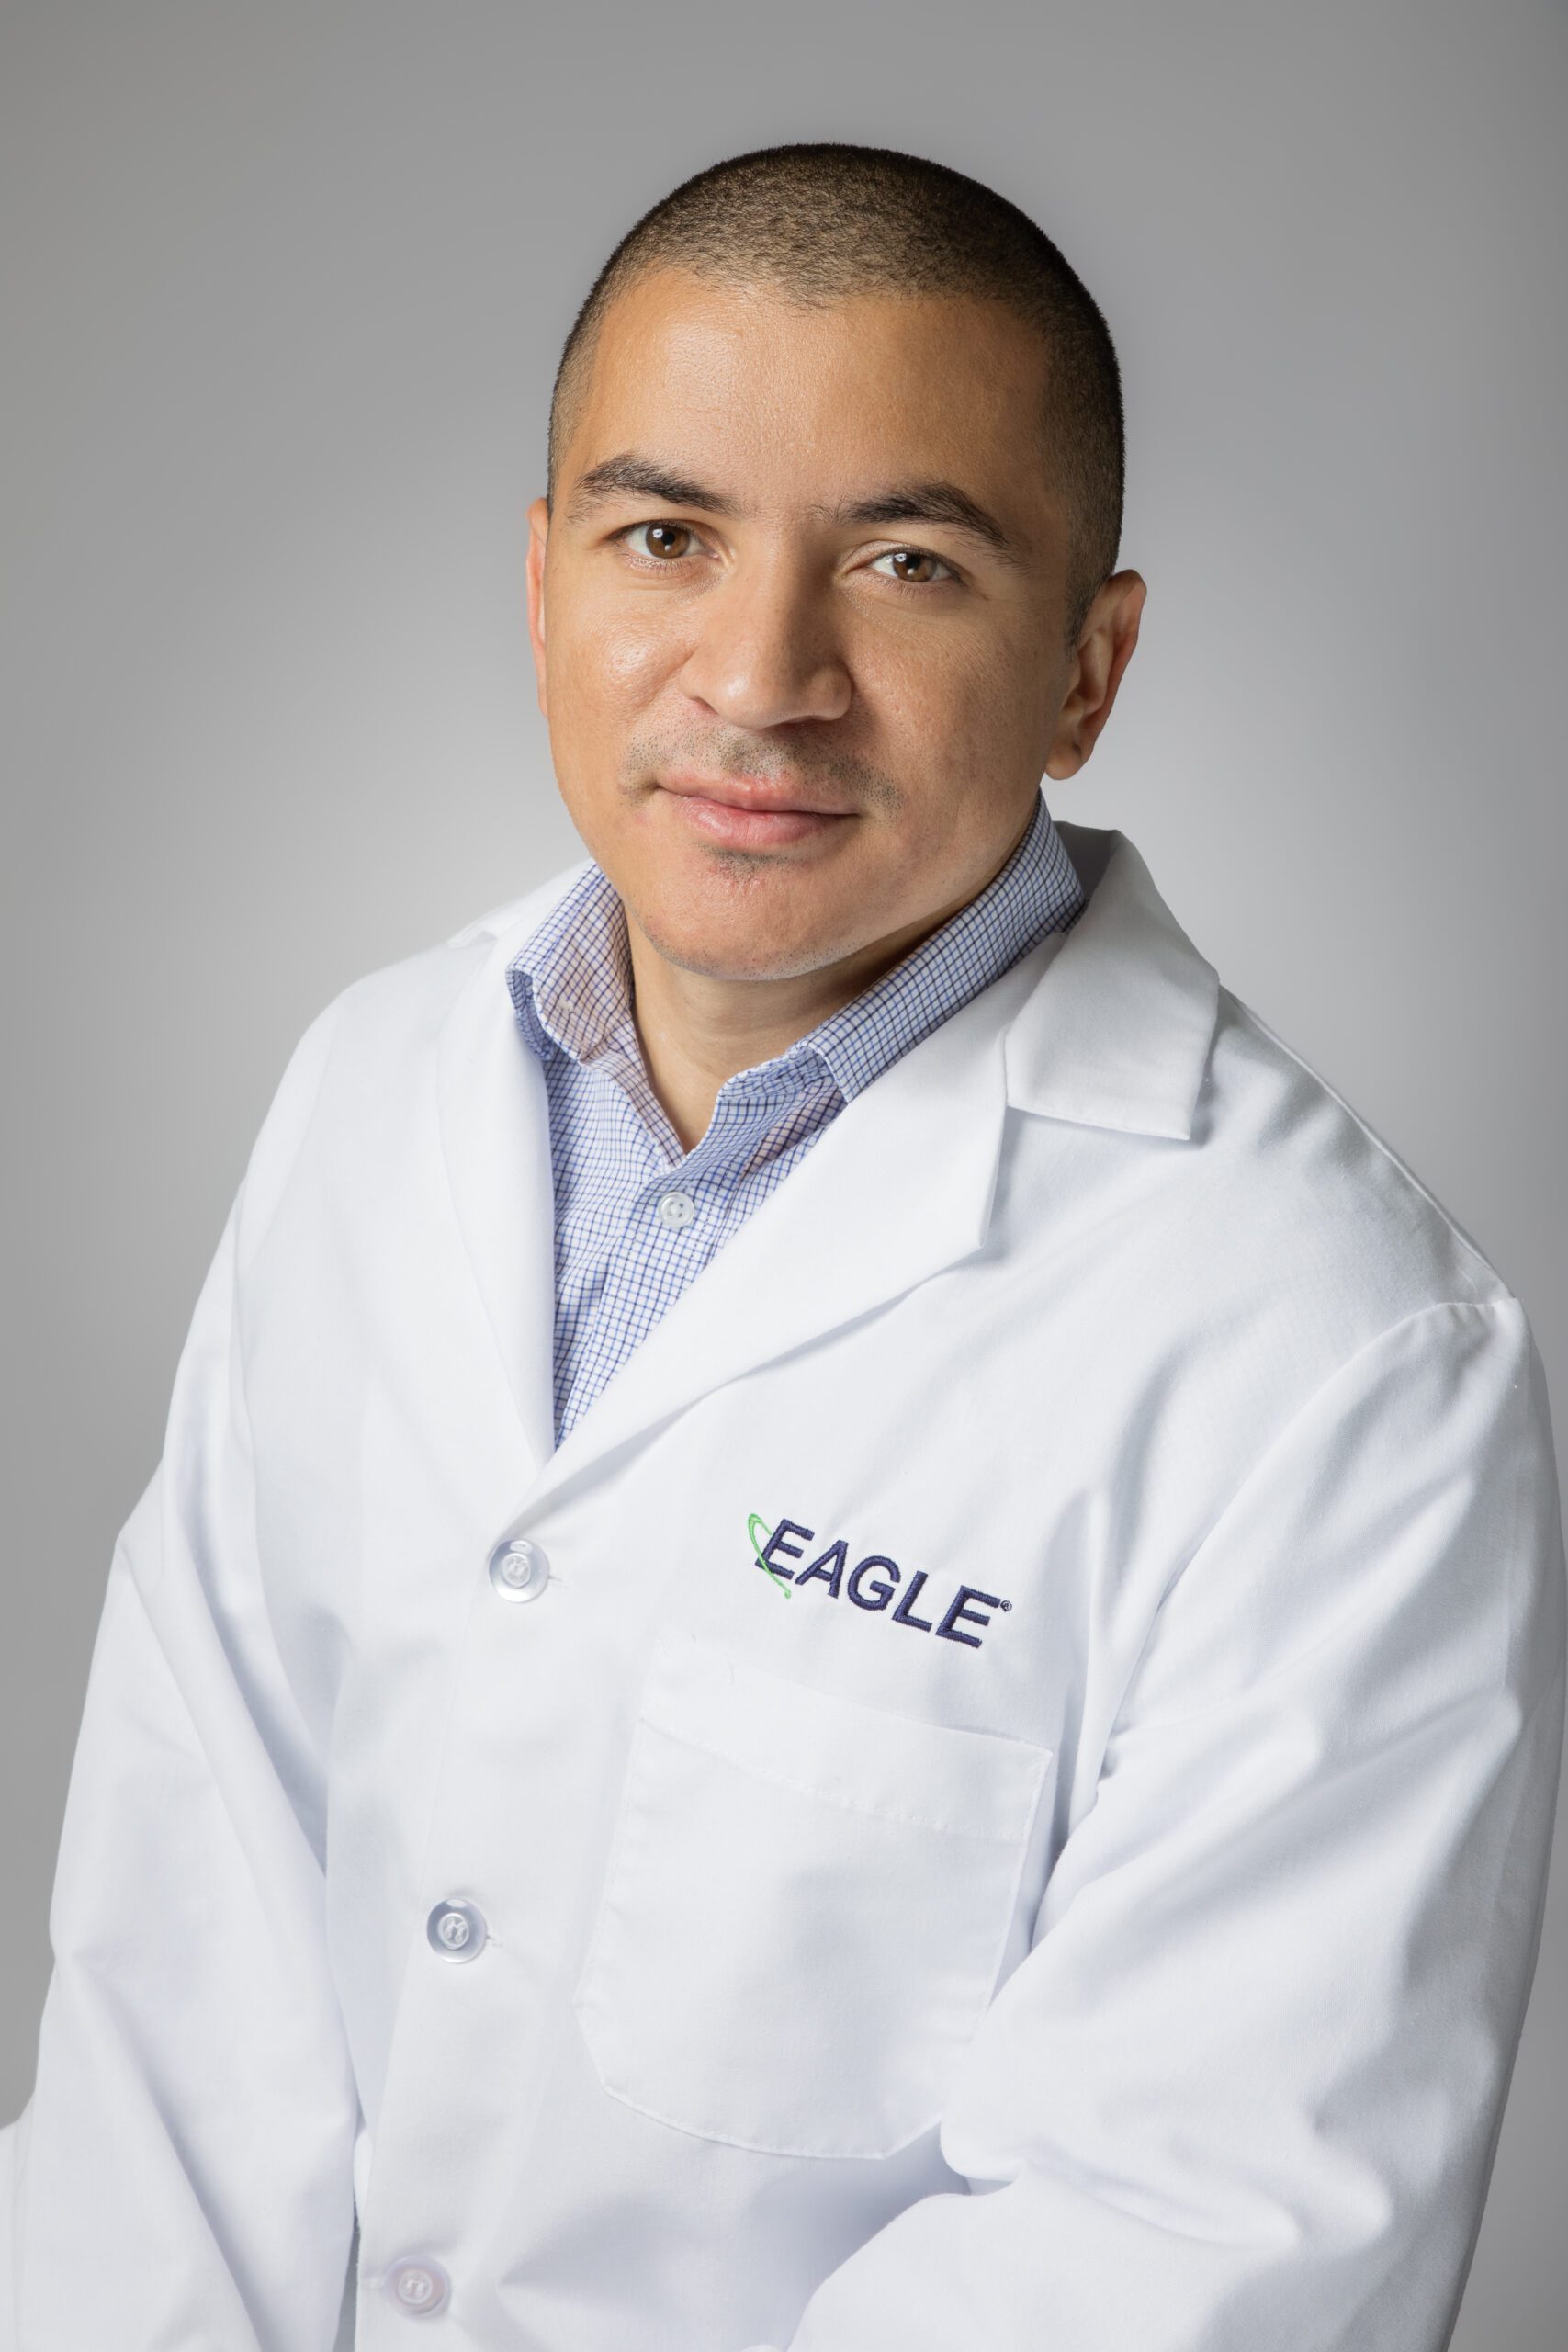 Quality Assurance / Quality Control Manager Miguel Hernandez smiles while wearing a white Eagle lab coat.